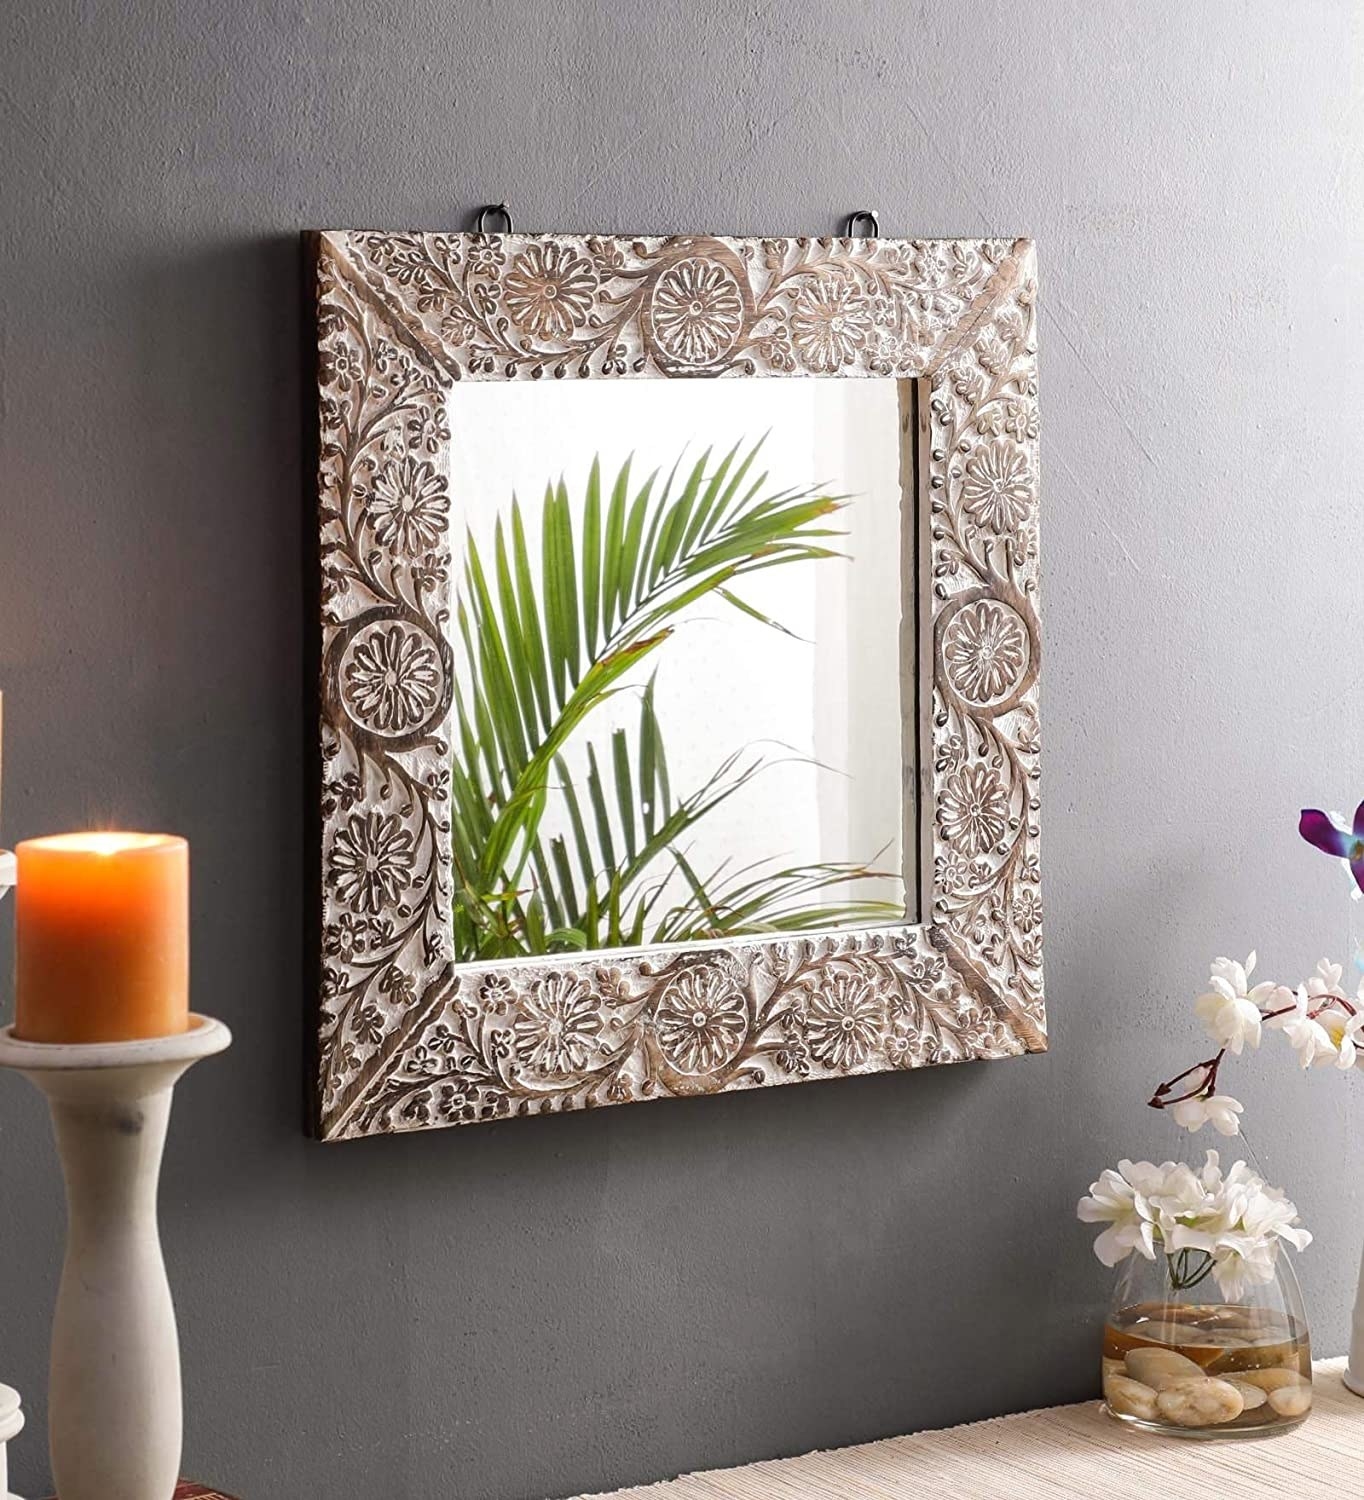 White and burnt brown polished framed square mirror hanging on a grey wall with a table holding a candle and a potted plant underneath